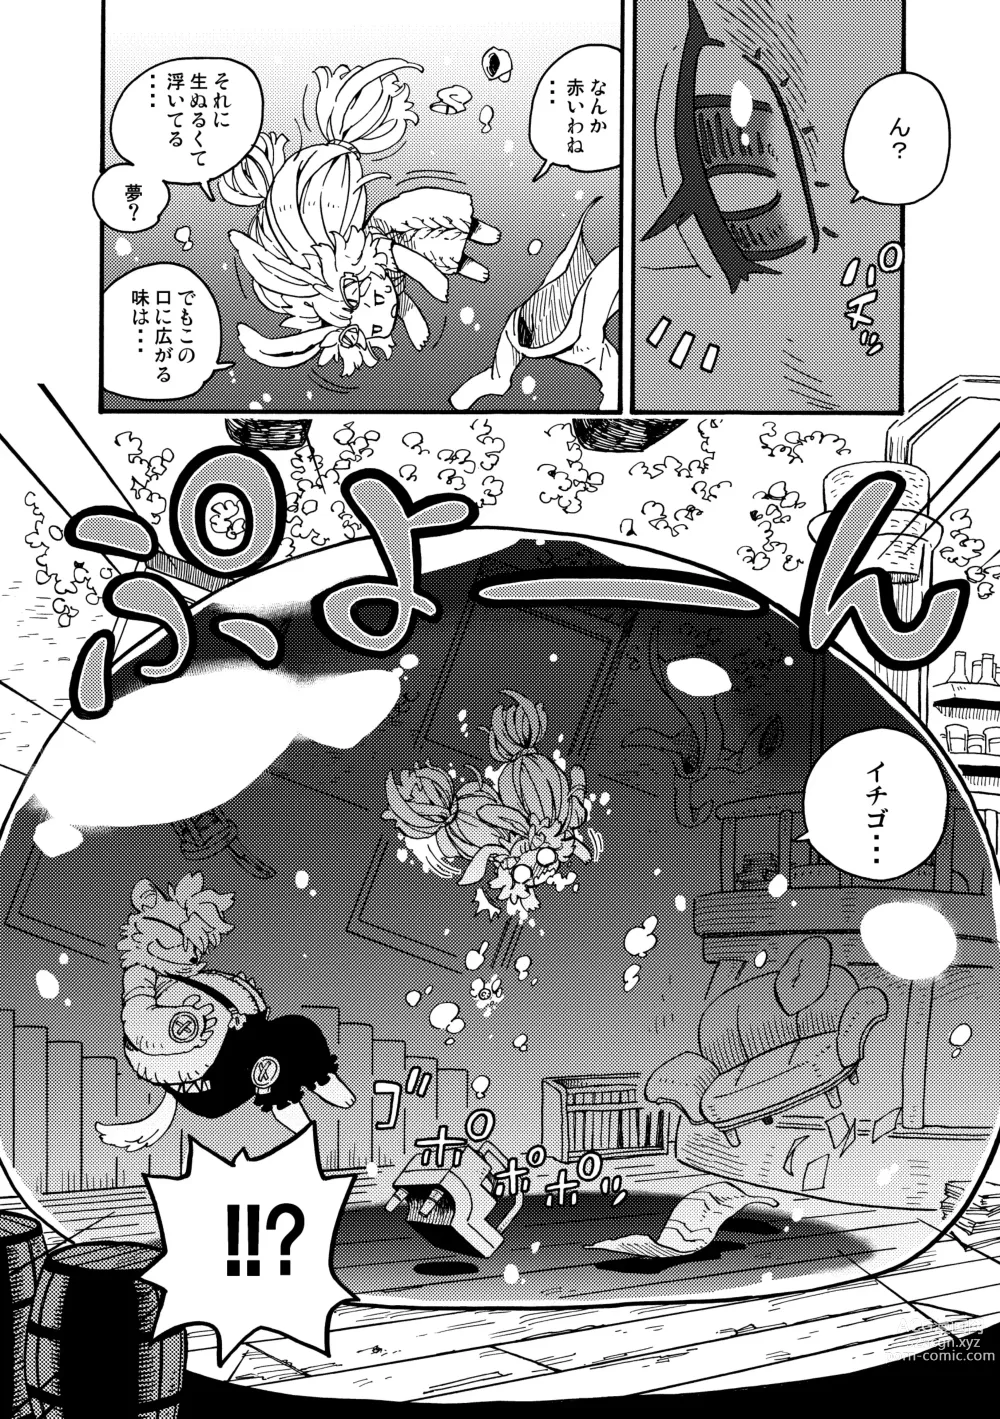 Page 24 of manga HYPER MARBLE EXTREME